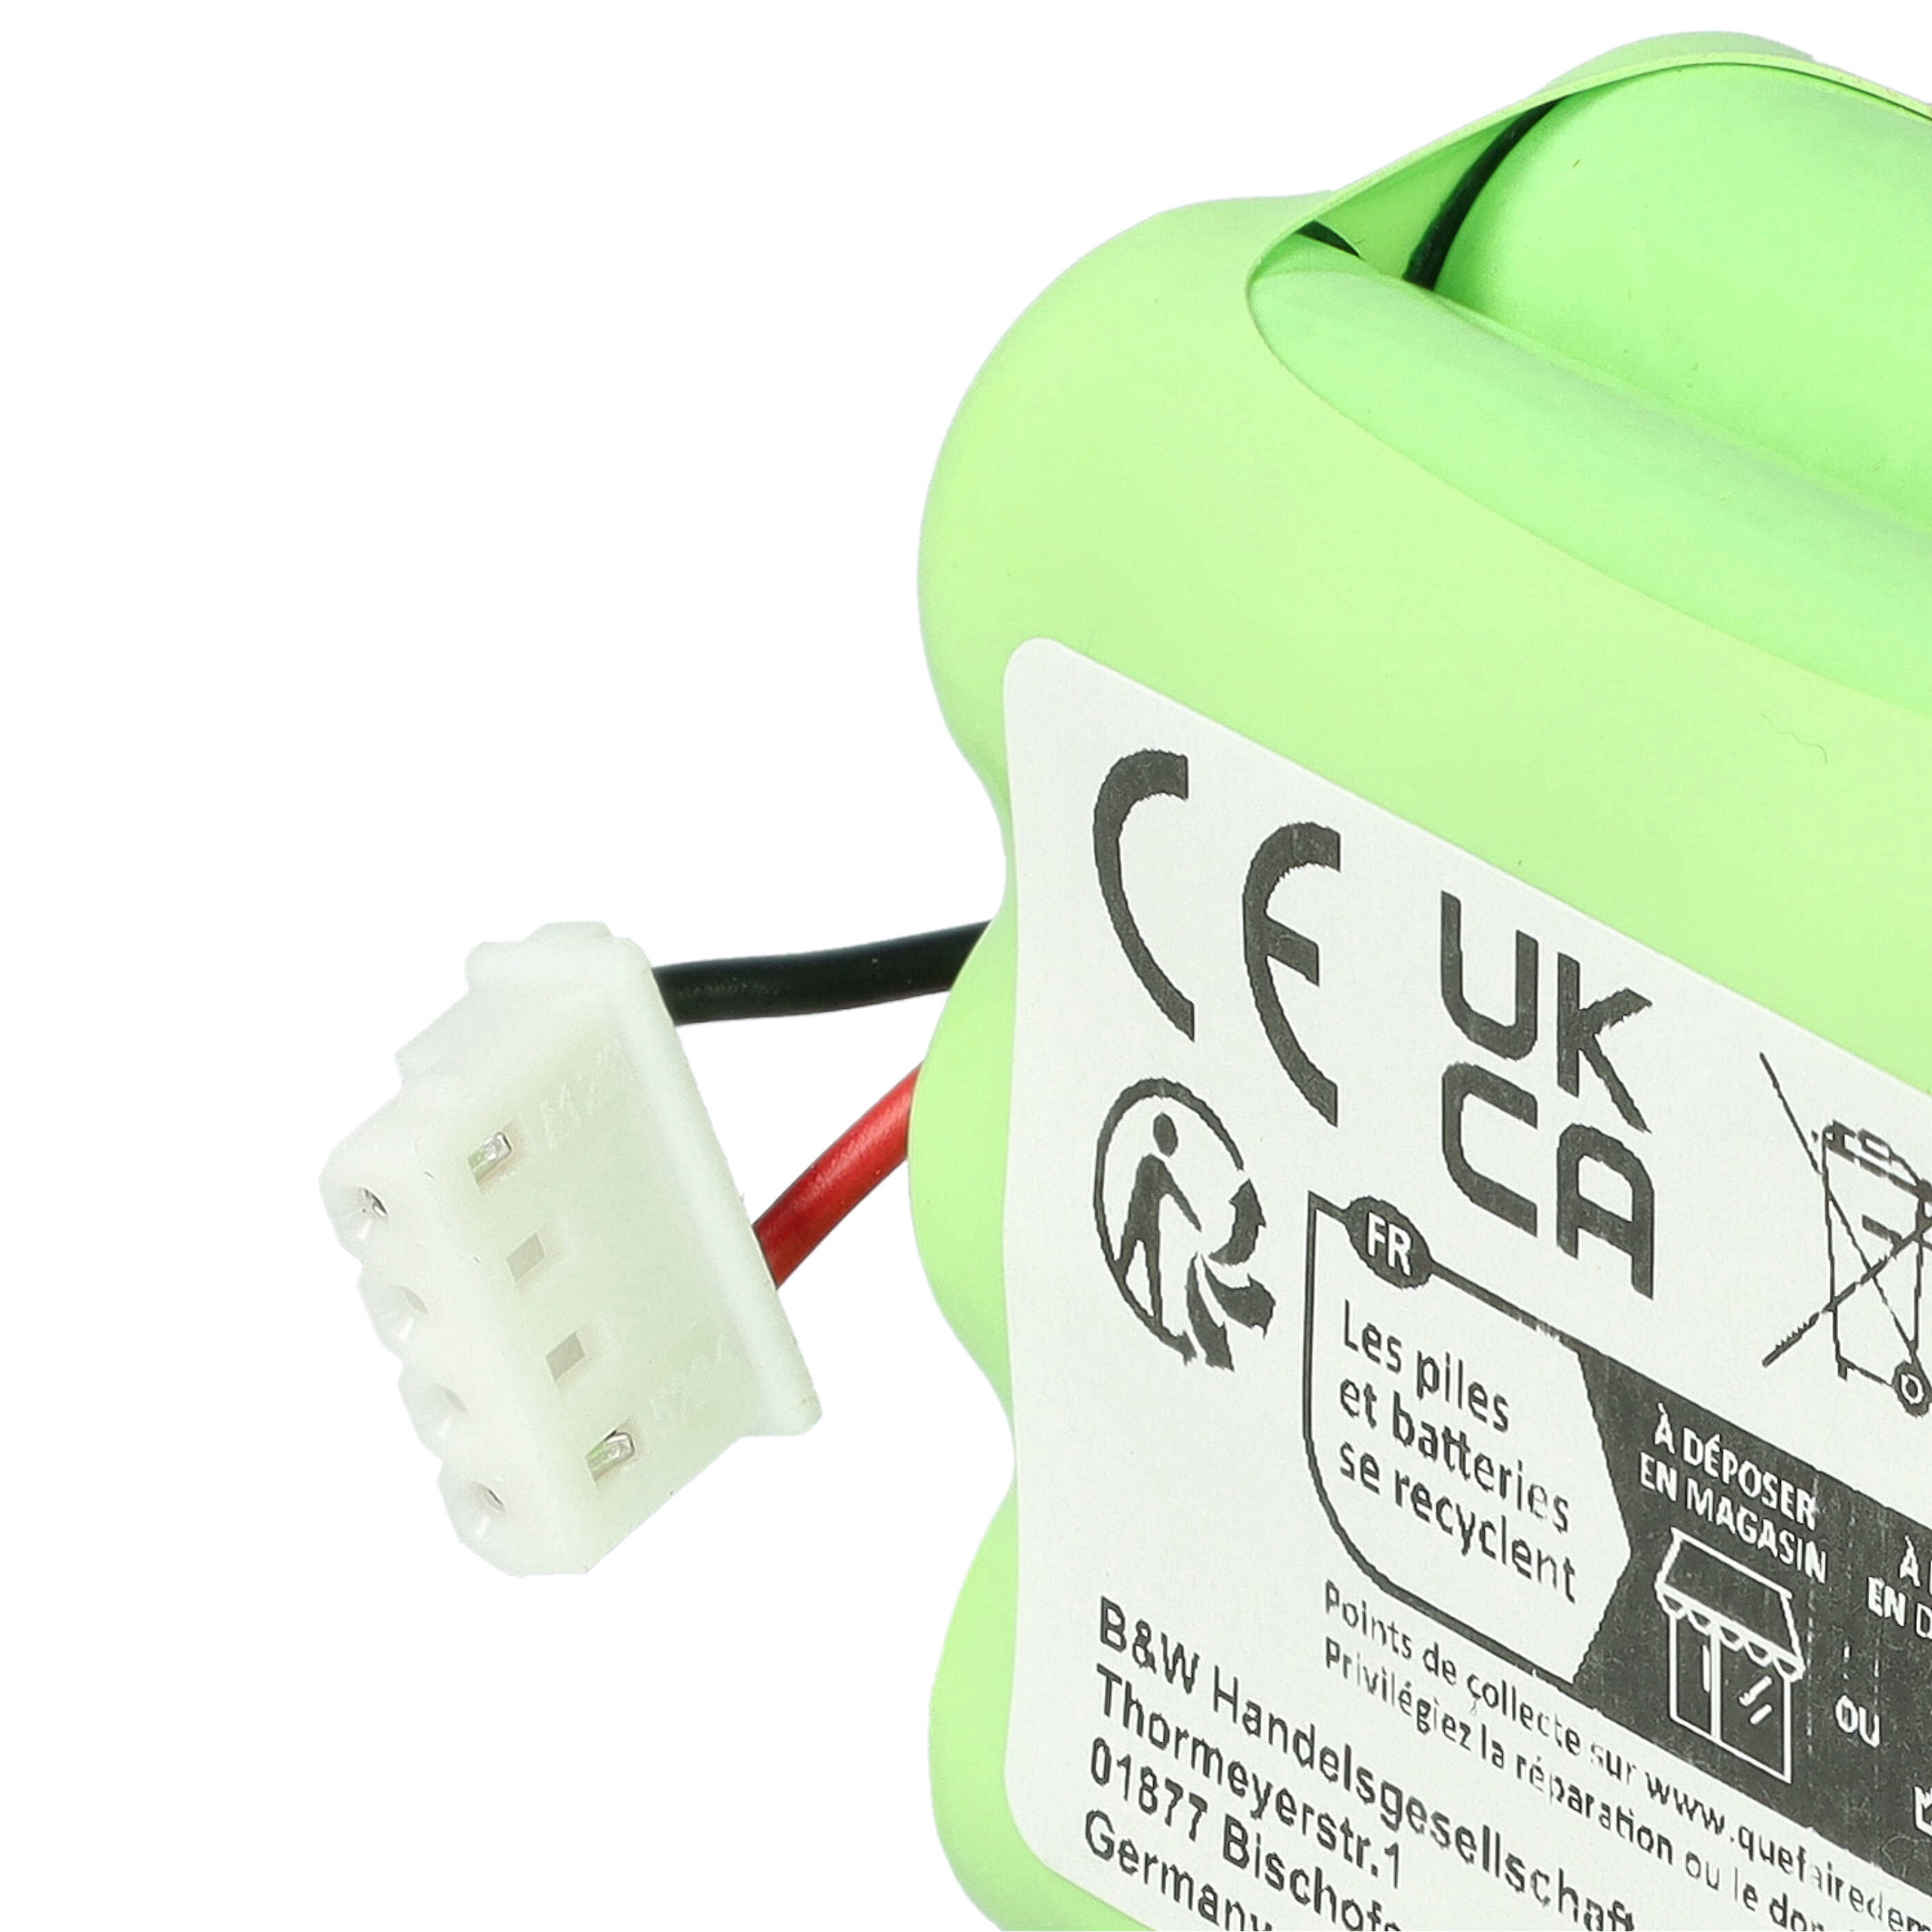 Battery Replacement for GPRHC152M073 for - 1500mAh, 7.2V, NiMH